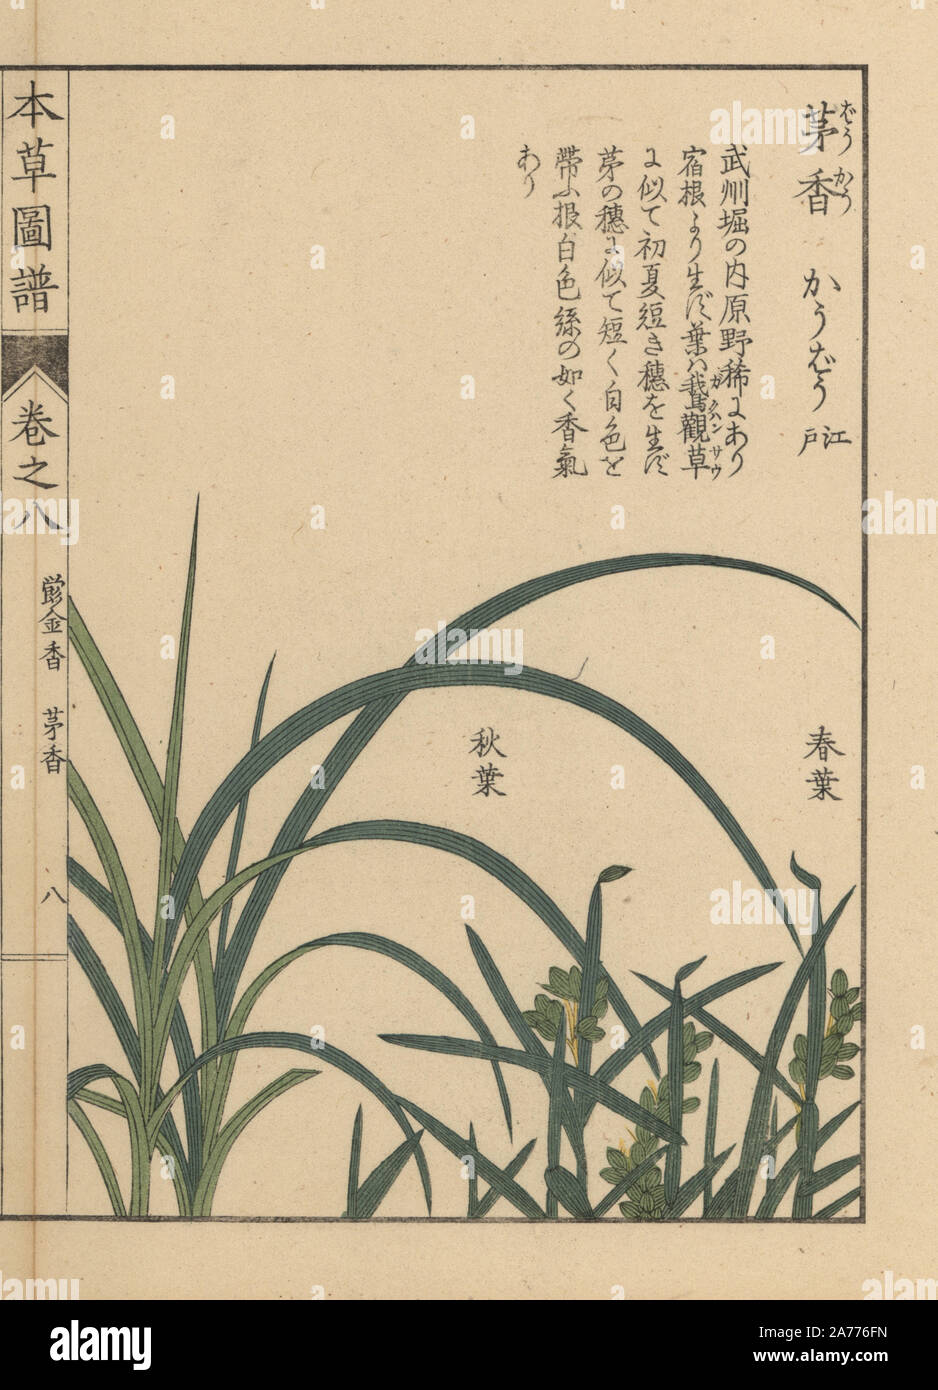 Northern holy grass or sweet grass, Anthoxanthum nitens (Hierochloe borealis Raem. et Sep.) Colour-printed woodblock engraving by Kan'en Iwasaki from 'Honzo Zufu,' an Illustrated Guide to Medicinal Plants, Japan, 1884. Iwasaki (1786-1842) was a Japanese botanist, entomologist and zoologist. He was one of the first Japanese botanists to incorporate western knowledge into his studies. Stock Photo